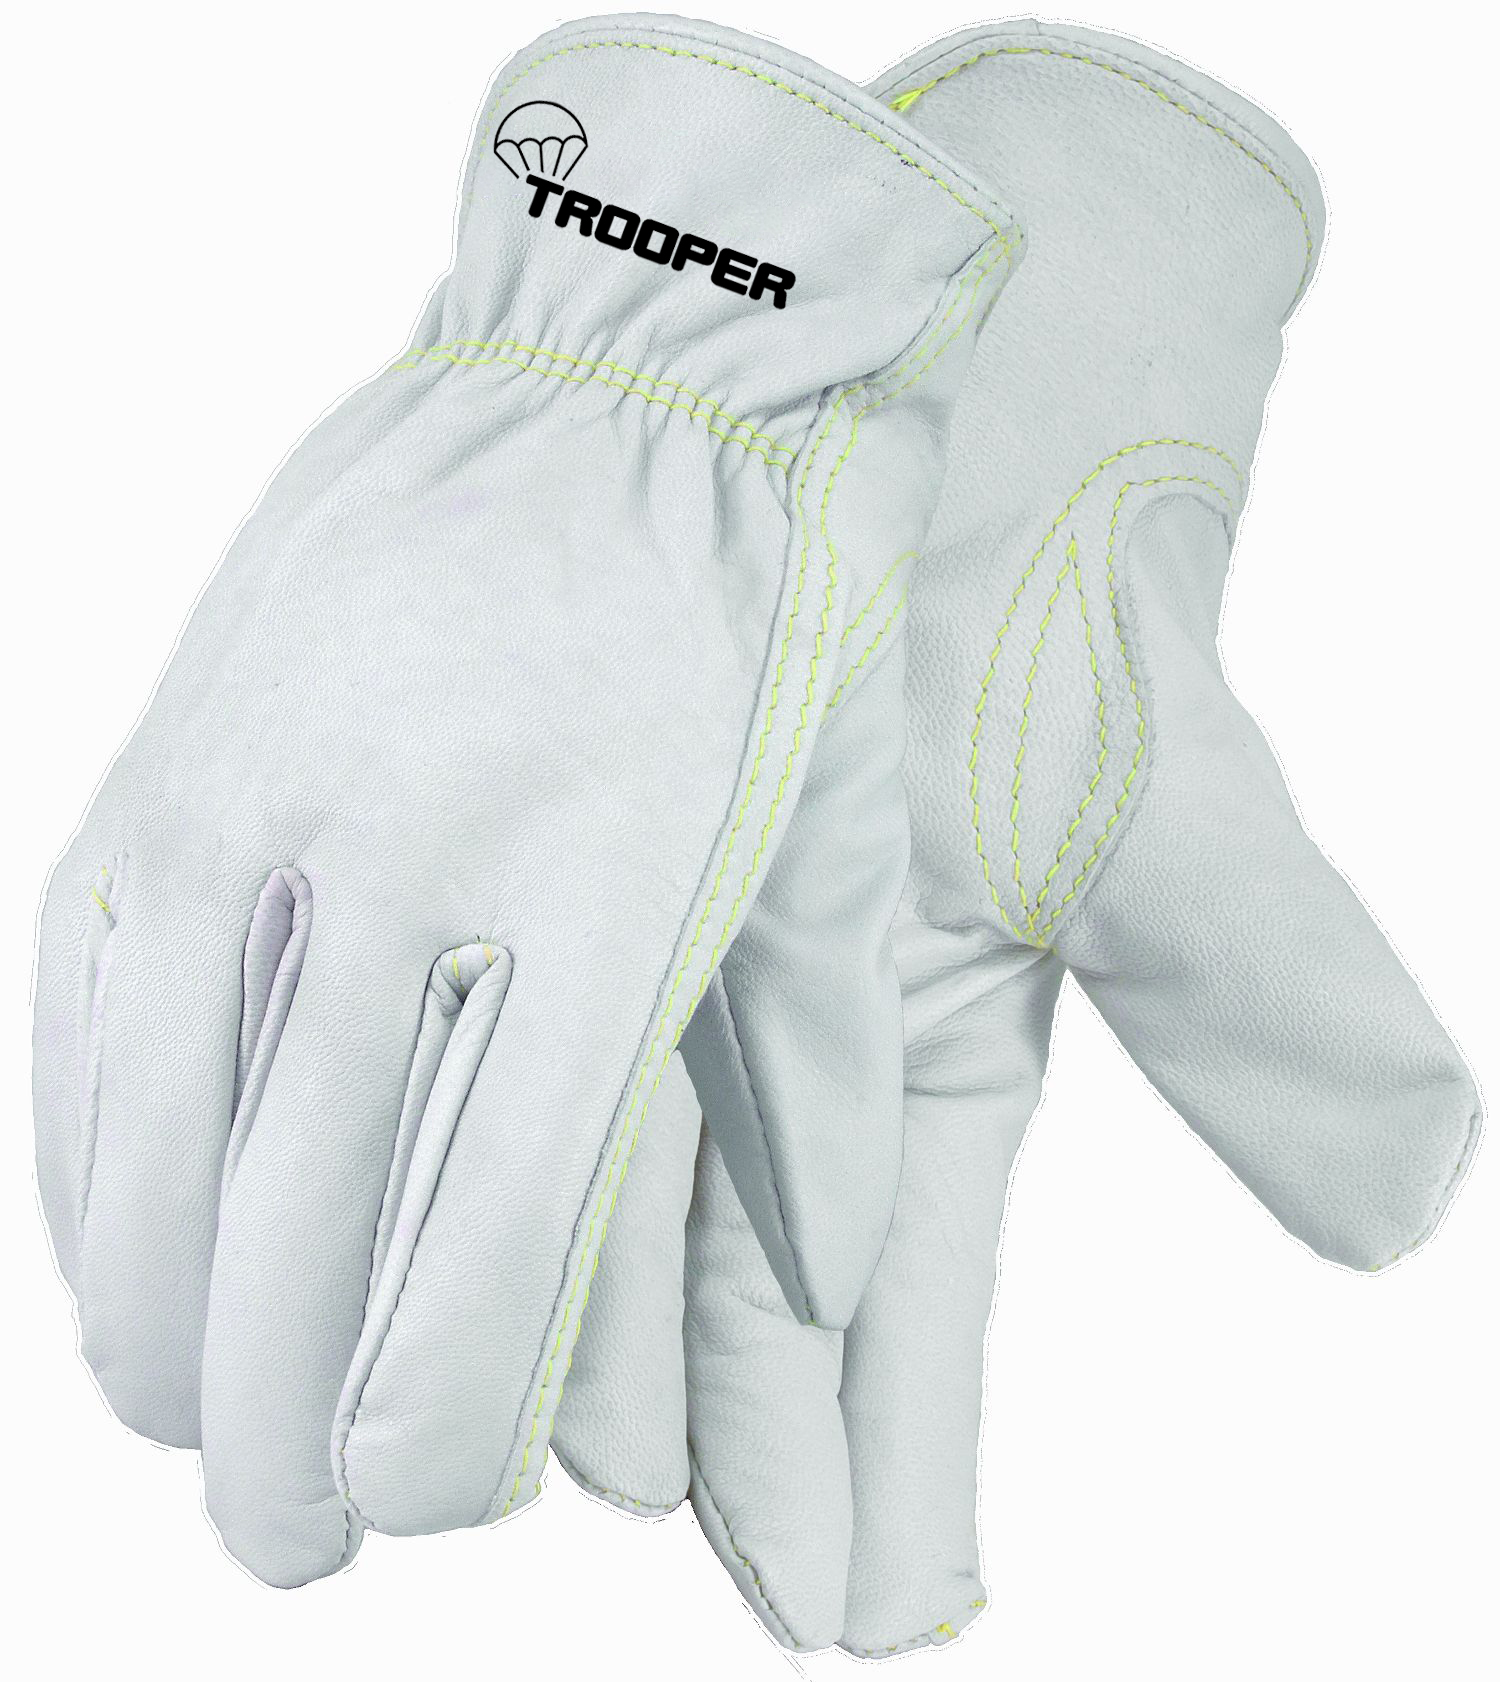 Trooper Goatskin Drivers Gloves, 12 Pairs/Package, Sewn with Cut Resistant Thread